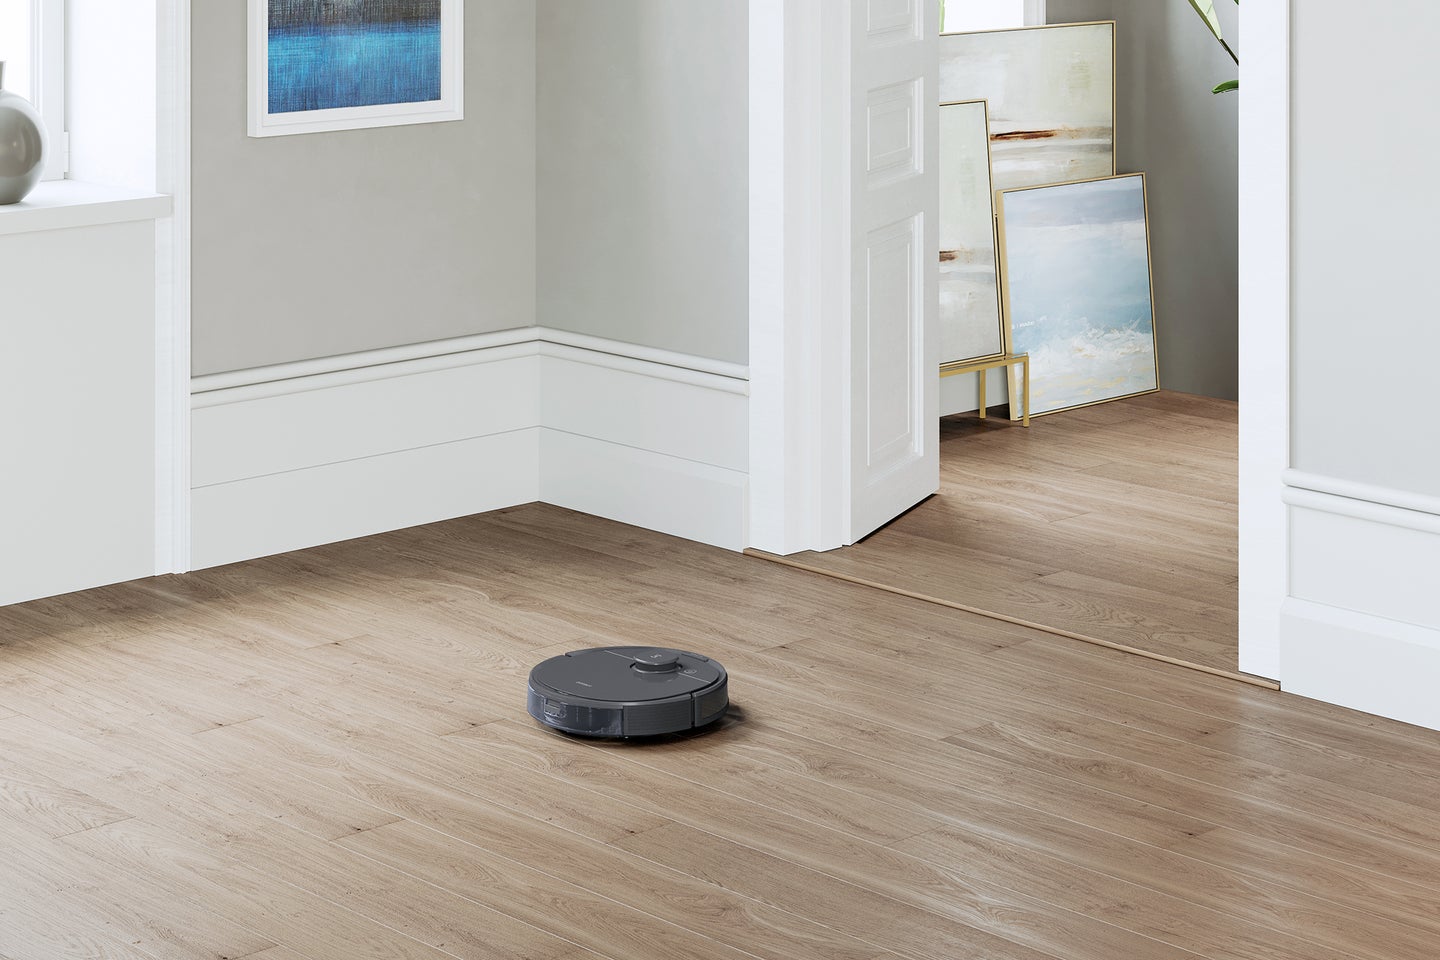 Best Robot Mops Robotic Cleaning Tools, Can Murphy’s Oil Soap Be Used On Laminate Floors